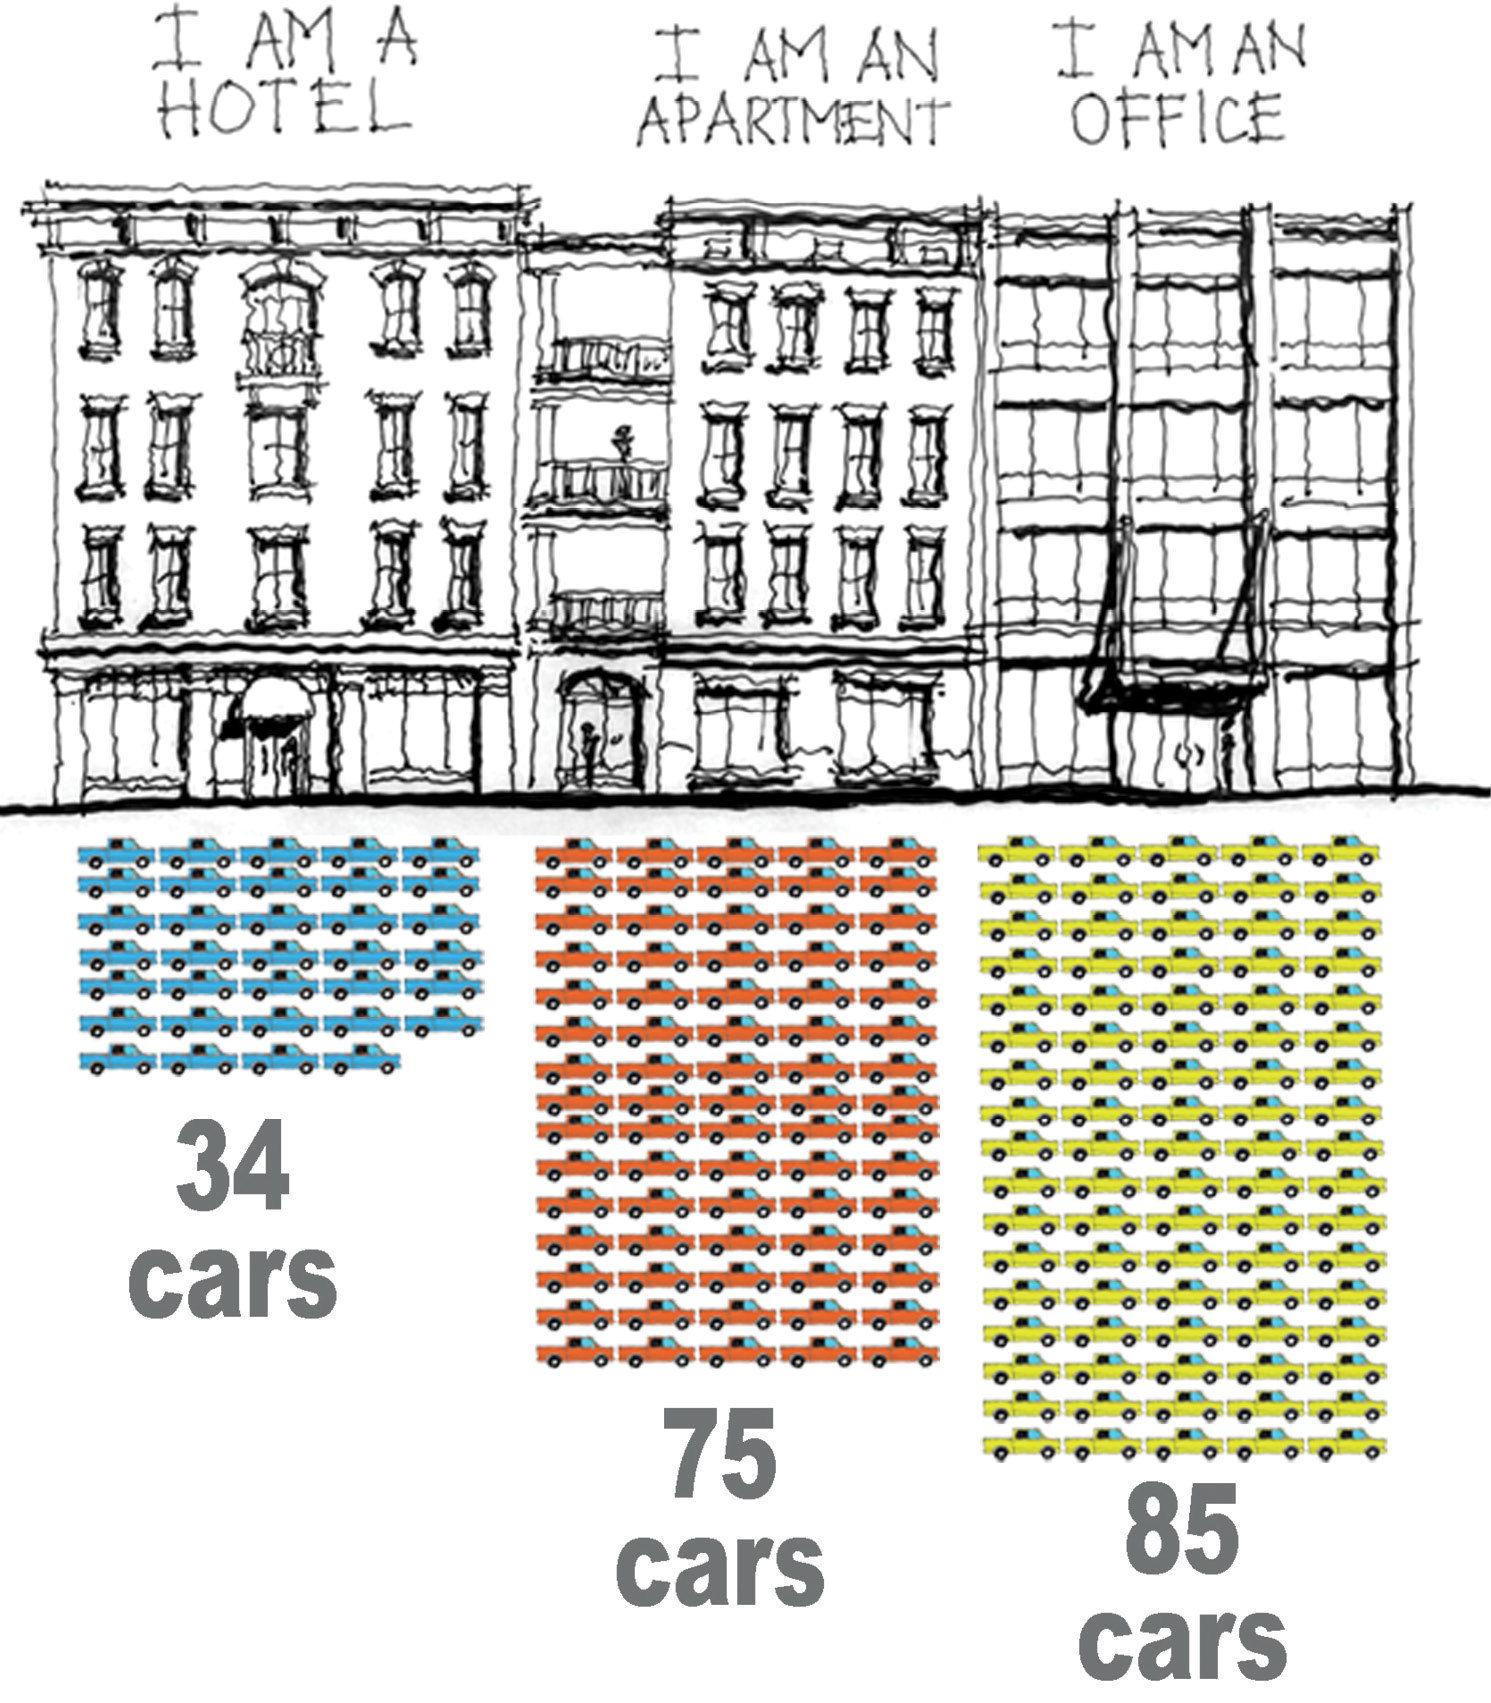 In a post for buildingsarecool.com, local architect Stephen Ramos calculated required parking for buildings of the same size but different uses, based on City of Charleston ratios, and determined that hotels contribute the least to traffic congestion.